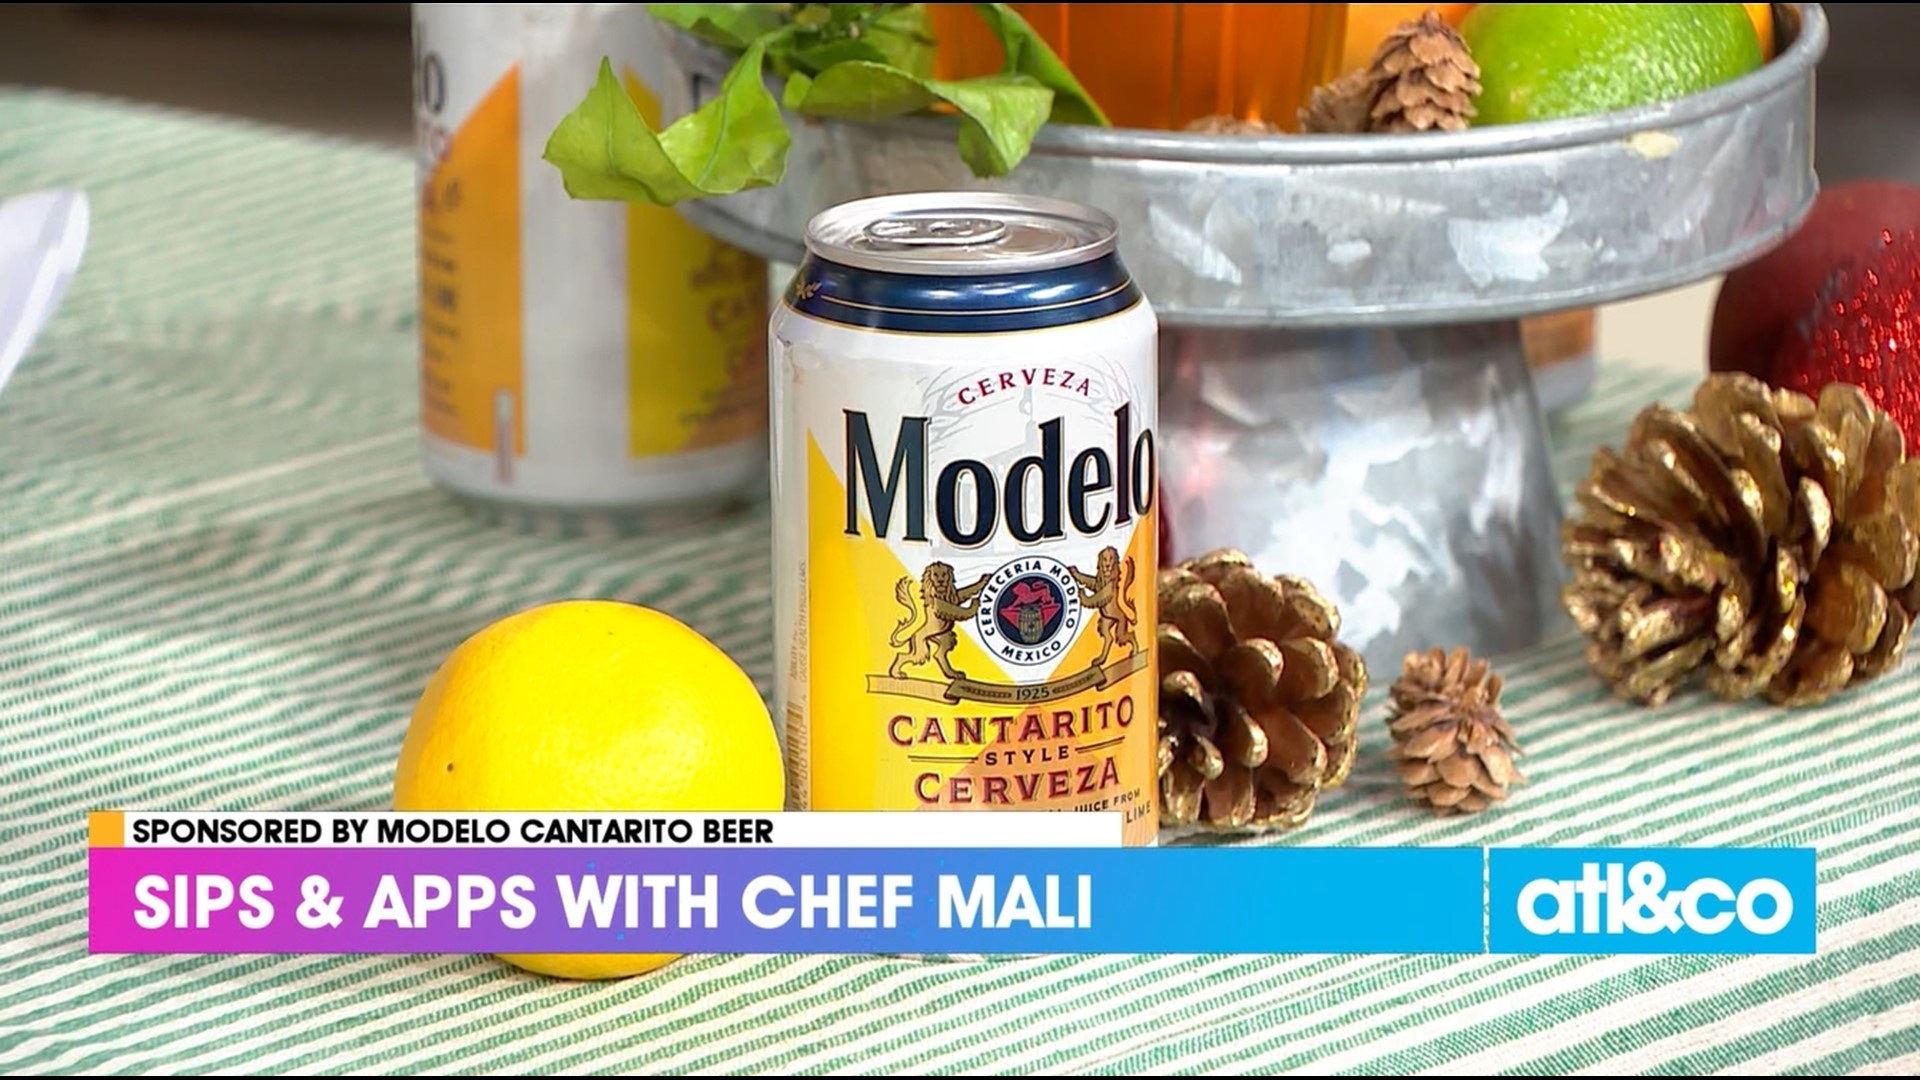 Chef Mali Wilson shares a yummy shrimp cocktail and toasts with a Modelo Cantarito Beer.